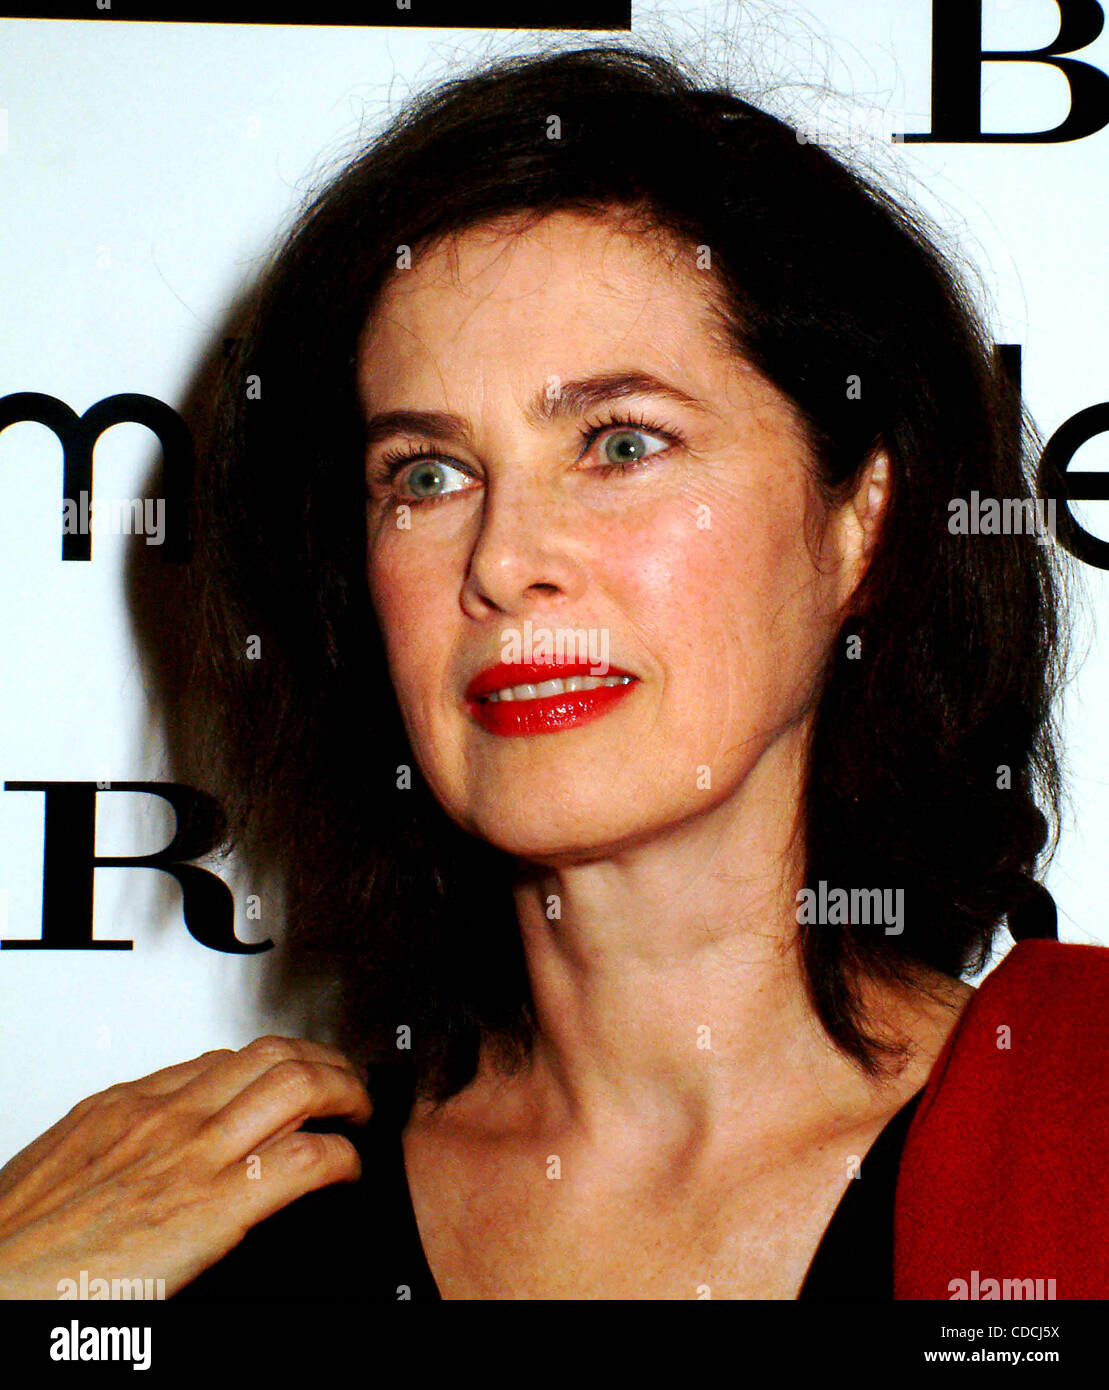 DAYLE HADDON.K32542ML.BLOOMINGDALE'S OPENS BURBERRY ACCESSORY SHOP WITH ...